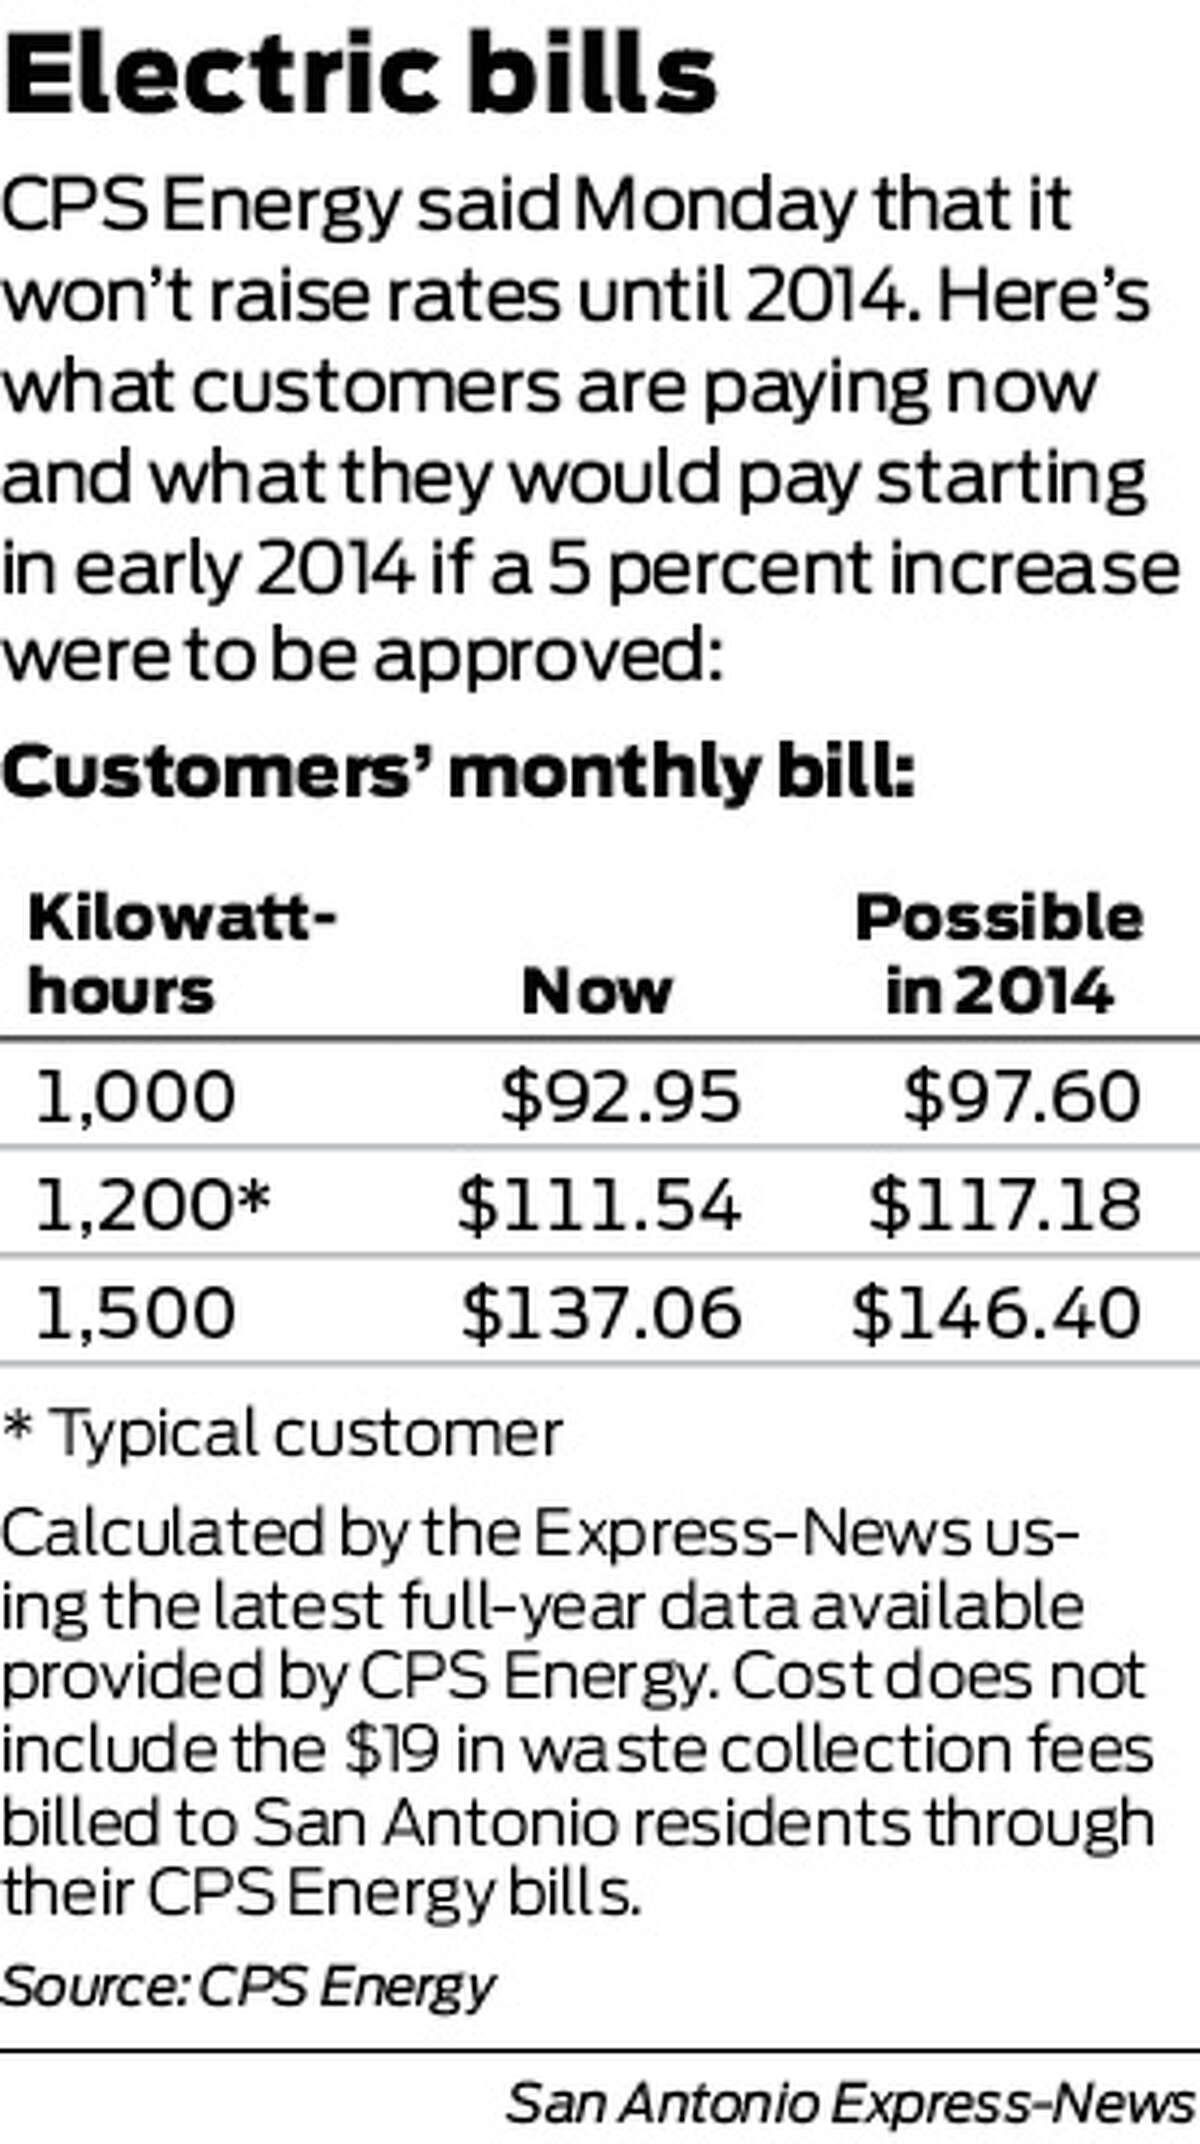 CPS Energy said Monday it won’t raise rates until 2014. Here’s what customers are paying now, and what they would pay starting in early 2014 if a 5 percent increase were to be approved.